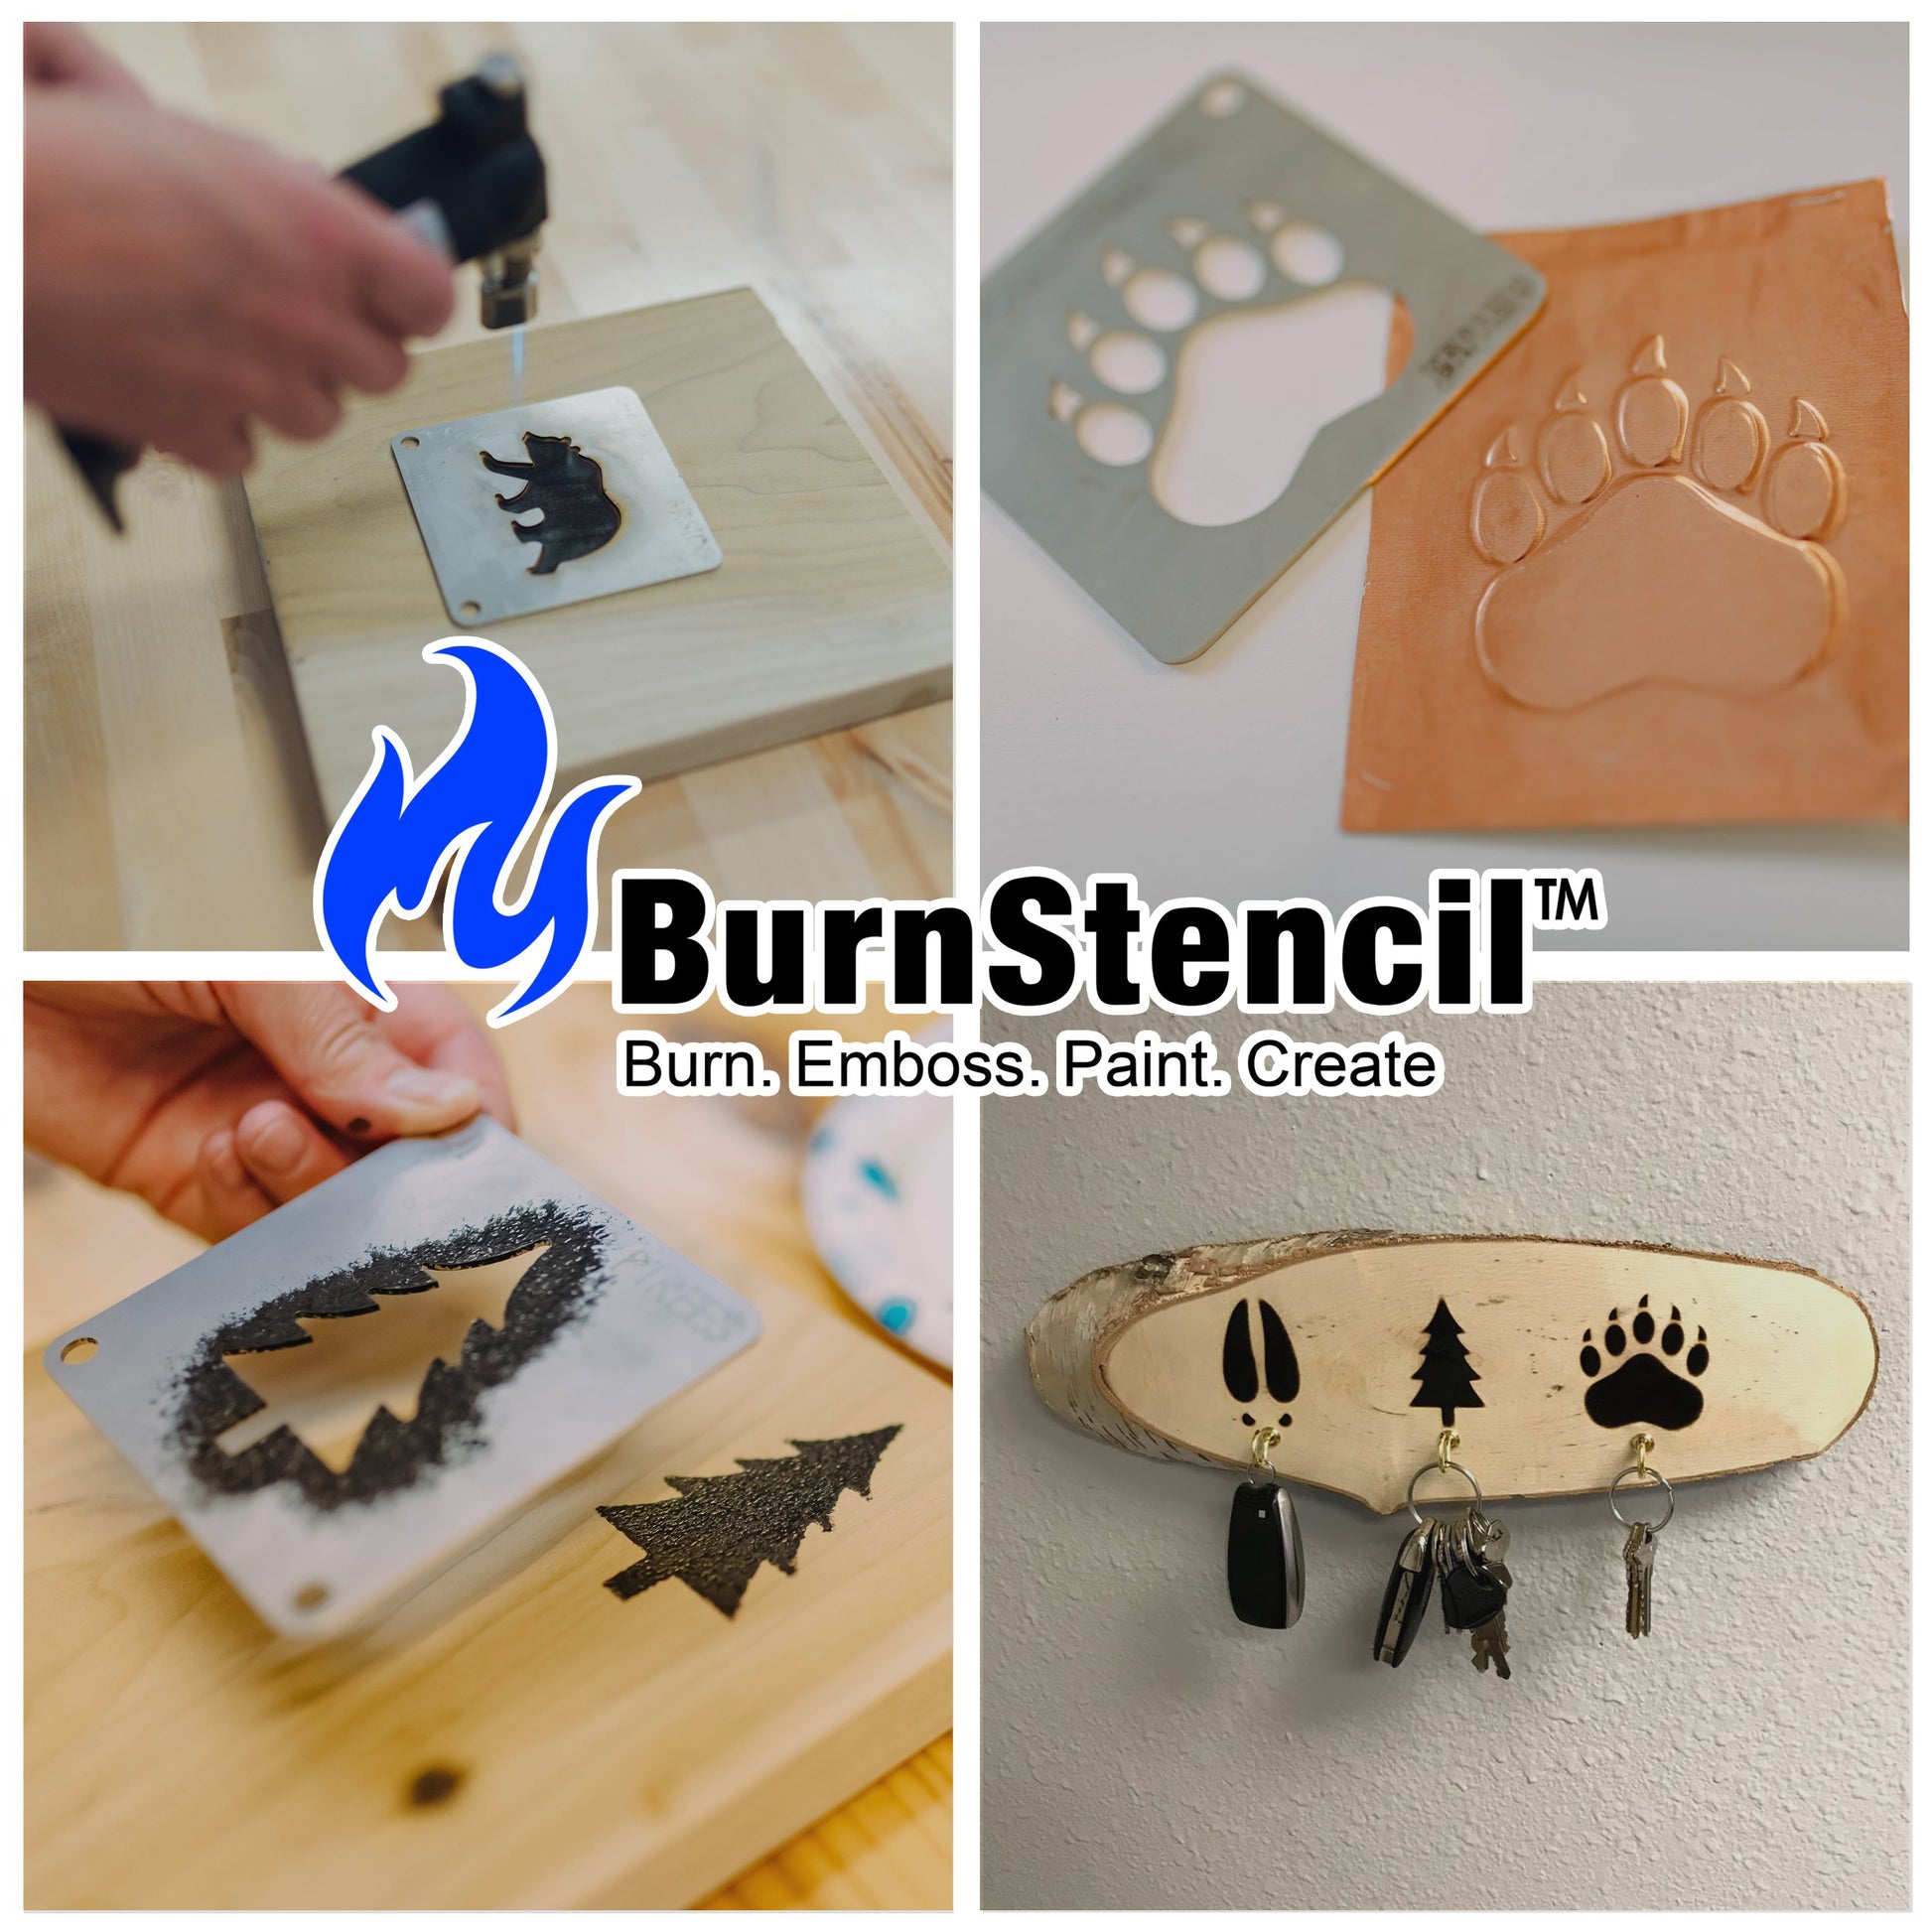 How to Wood Burn using Stencils 